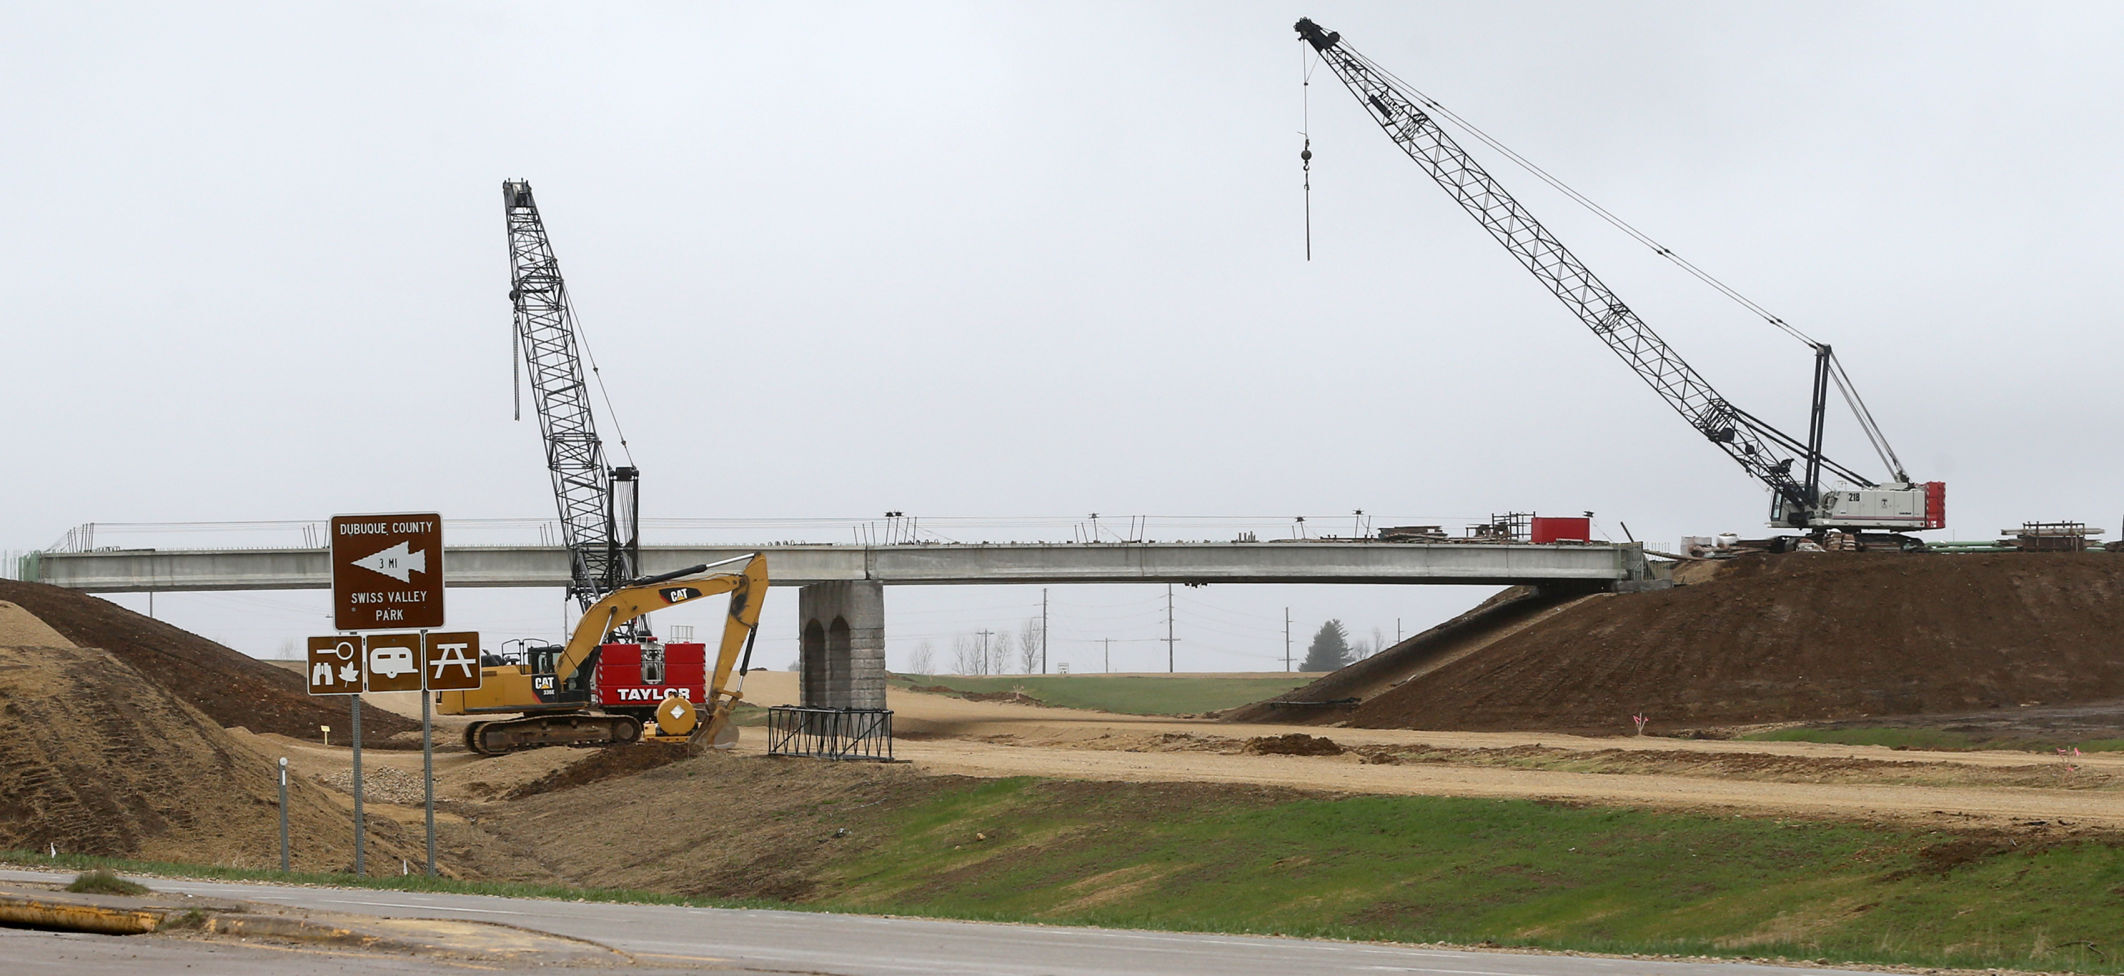 Work continues on an overpass along U.S. 20 near North Cascade and Swiss Valley roads in rural Dubuque. PHOTO CREDIT: JESSICA REILLY